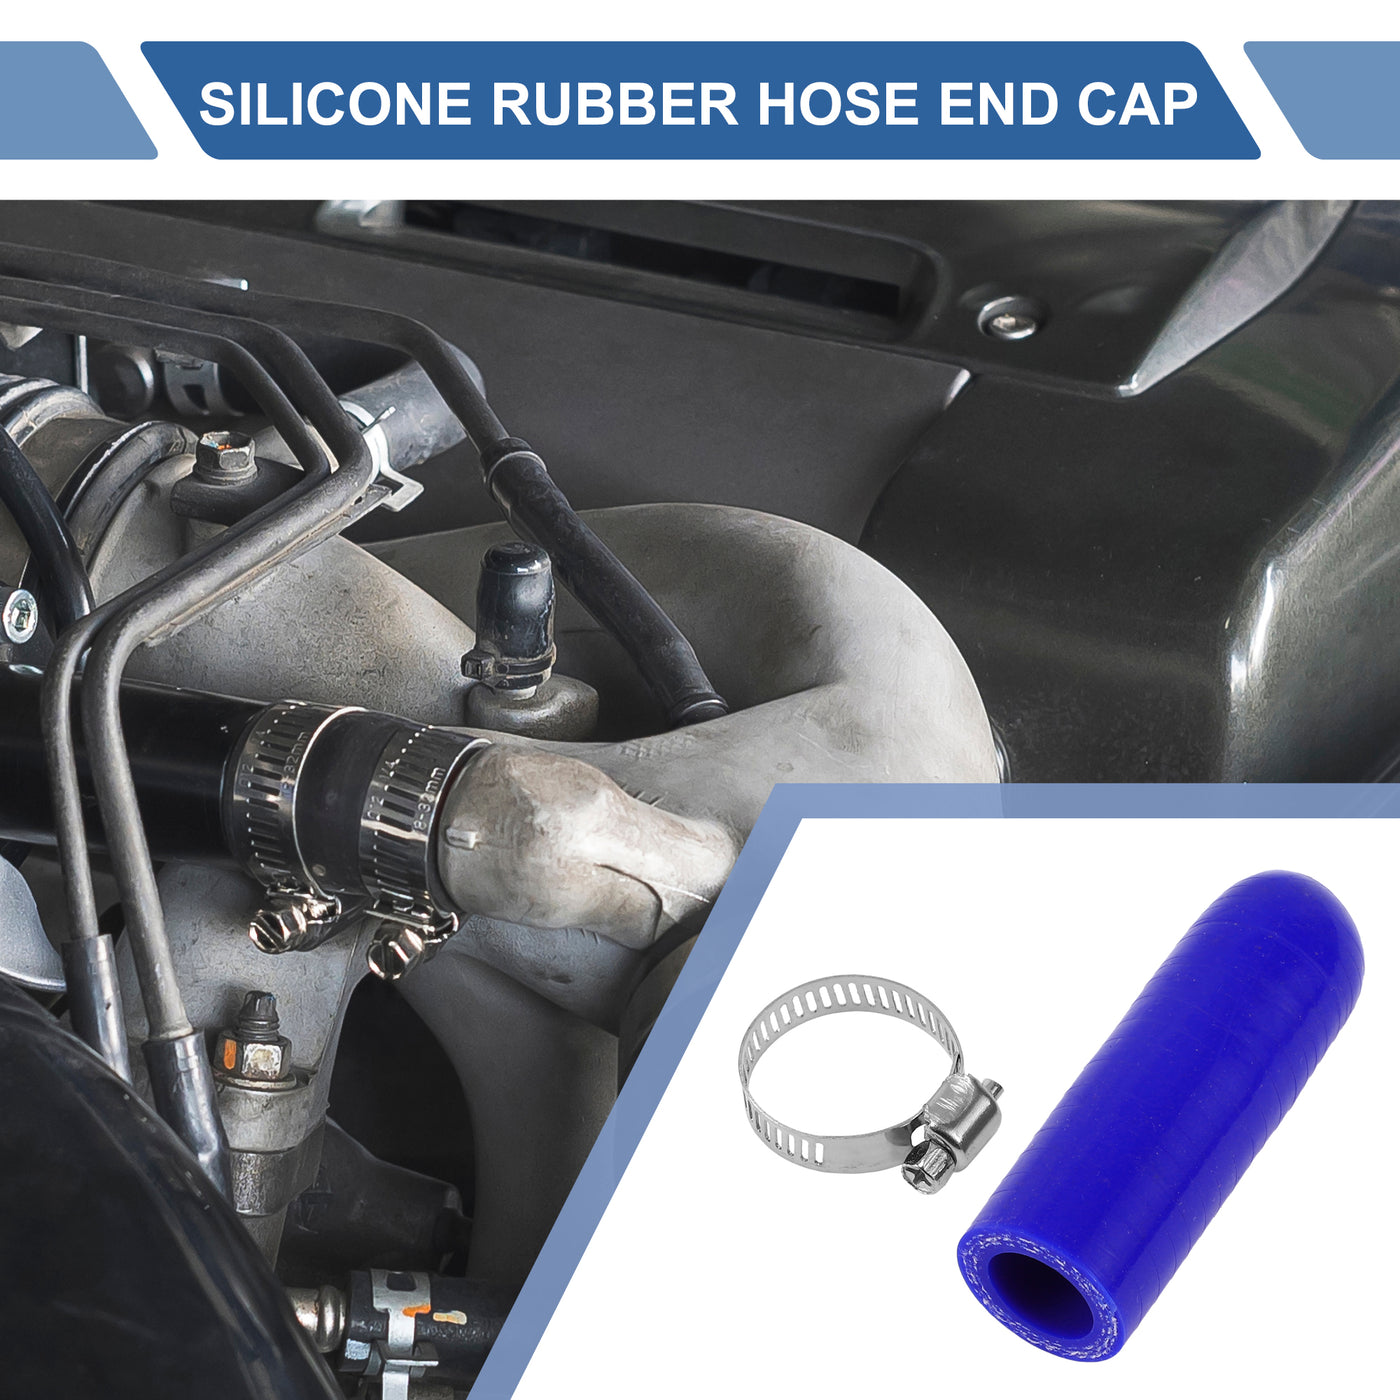 X AUTOHAUX 1 Pcs 60mm Length 16mm/0.63" ID Blue Car Silicone Rubber Hose End Cap with Clamp Silicone Reinforced Blanking Cap for Bypass Tube Universal